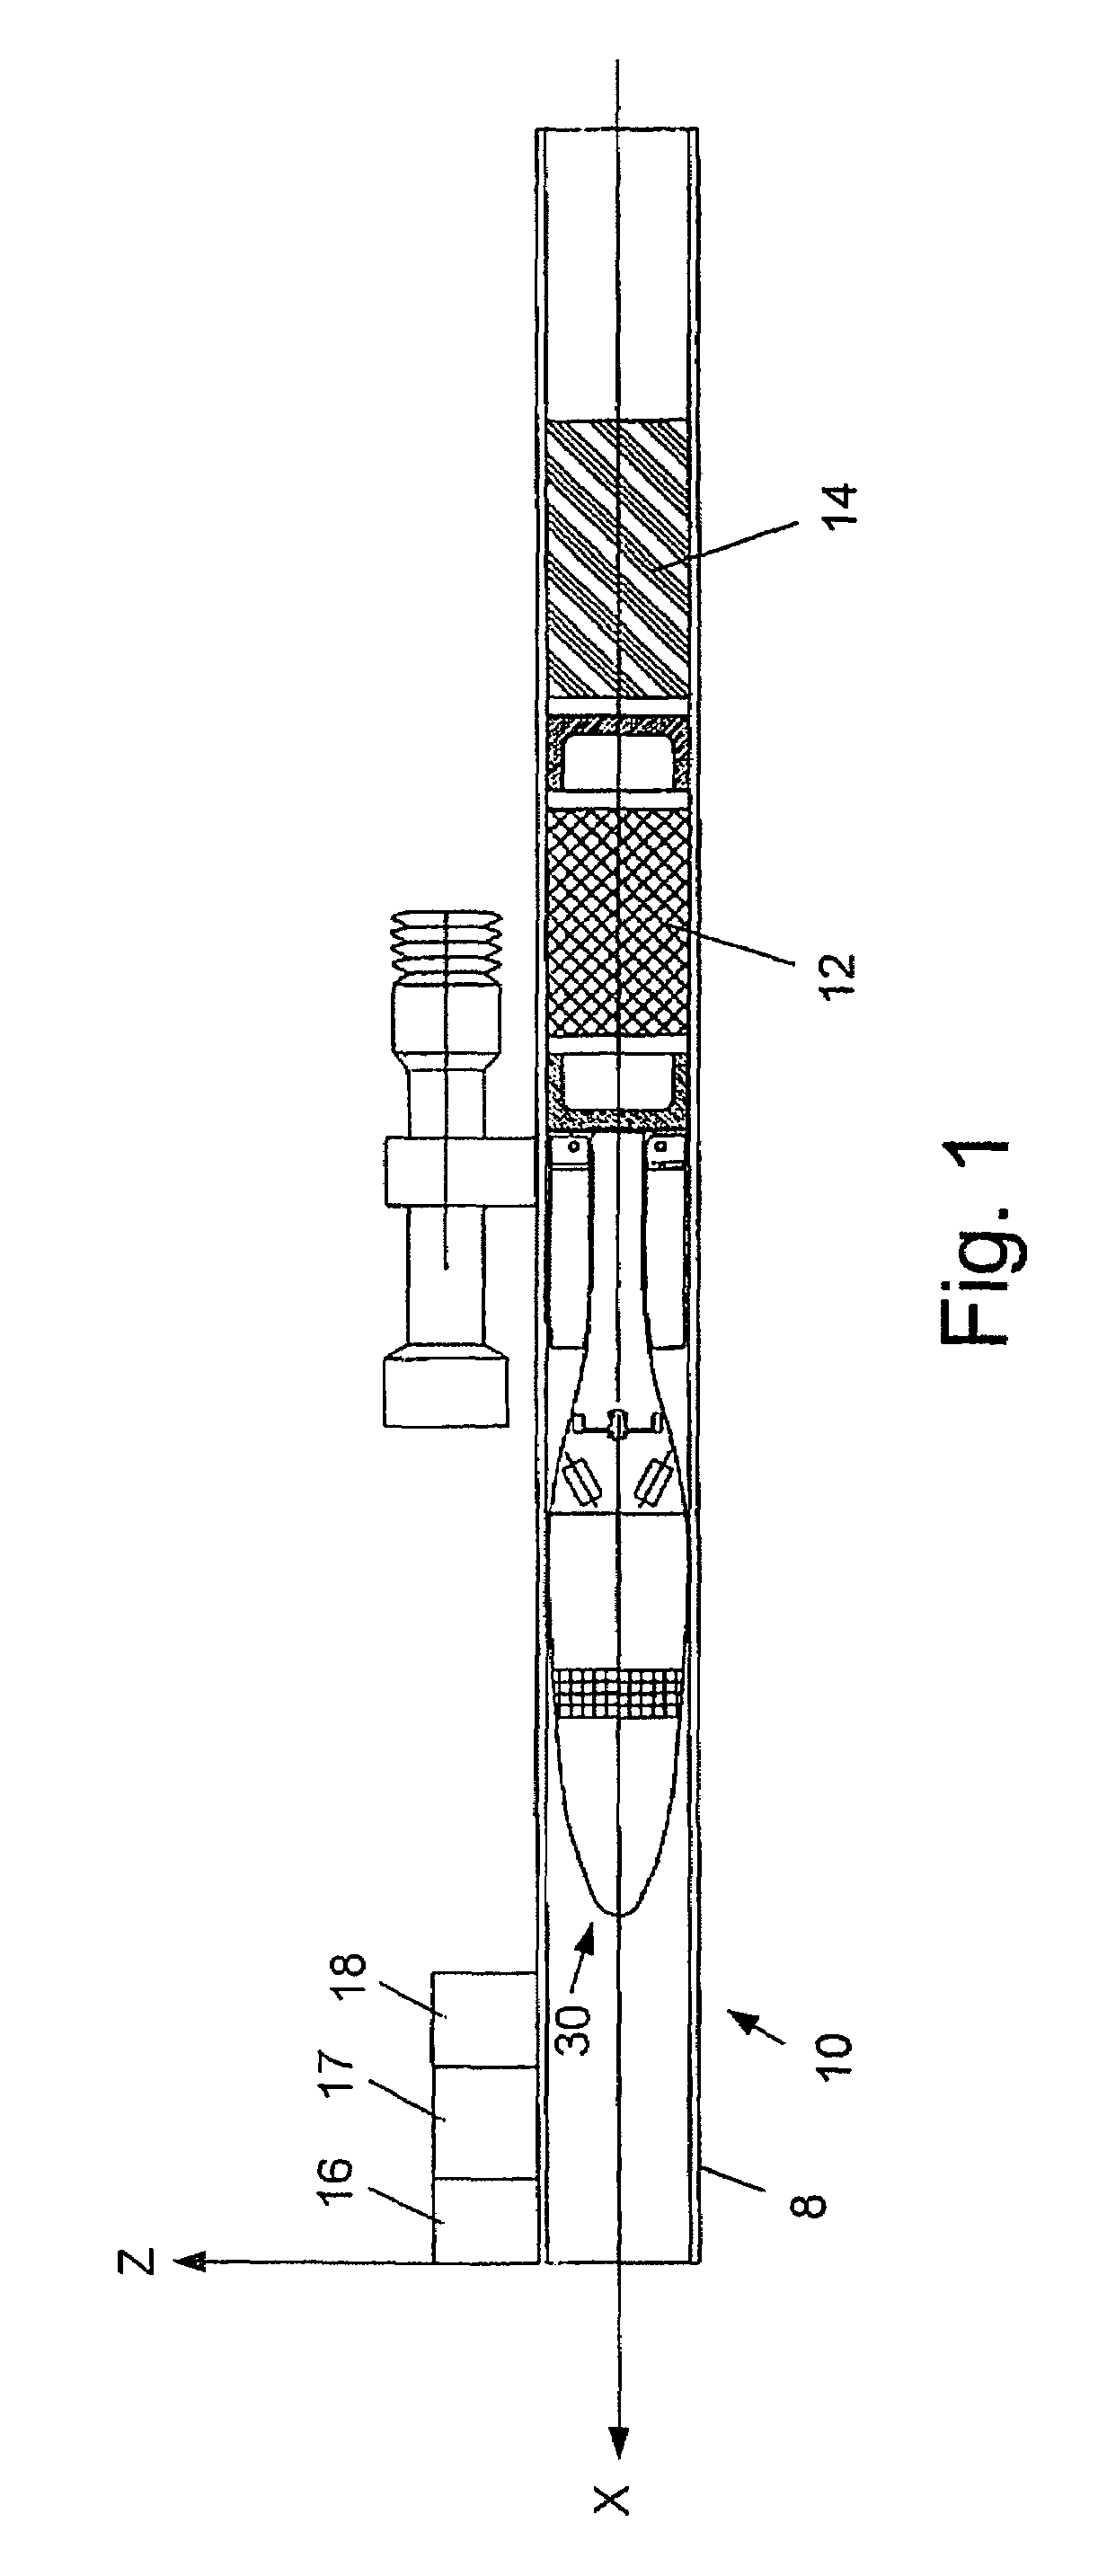 Method and system for adjusting the flight path of an unguided projectile, with compensation for jittering deviation